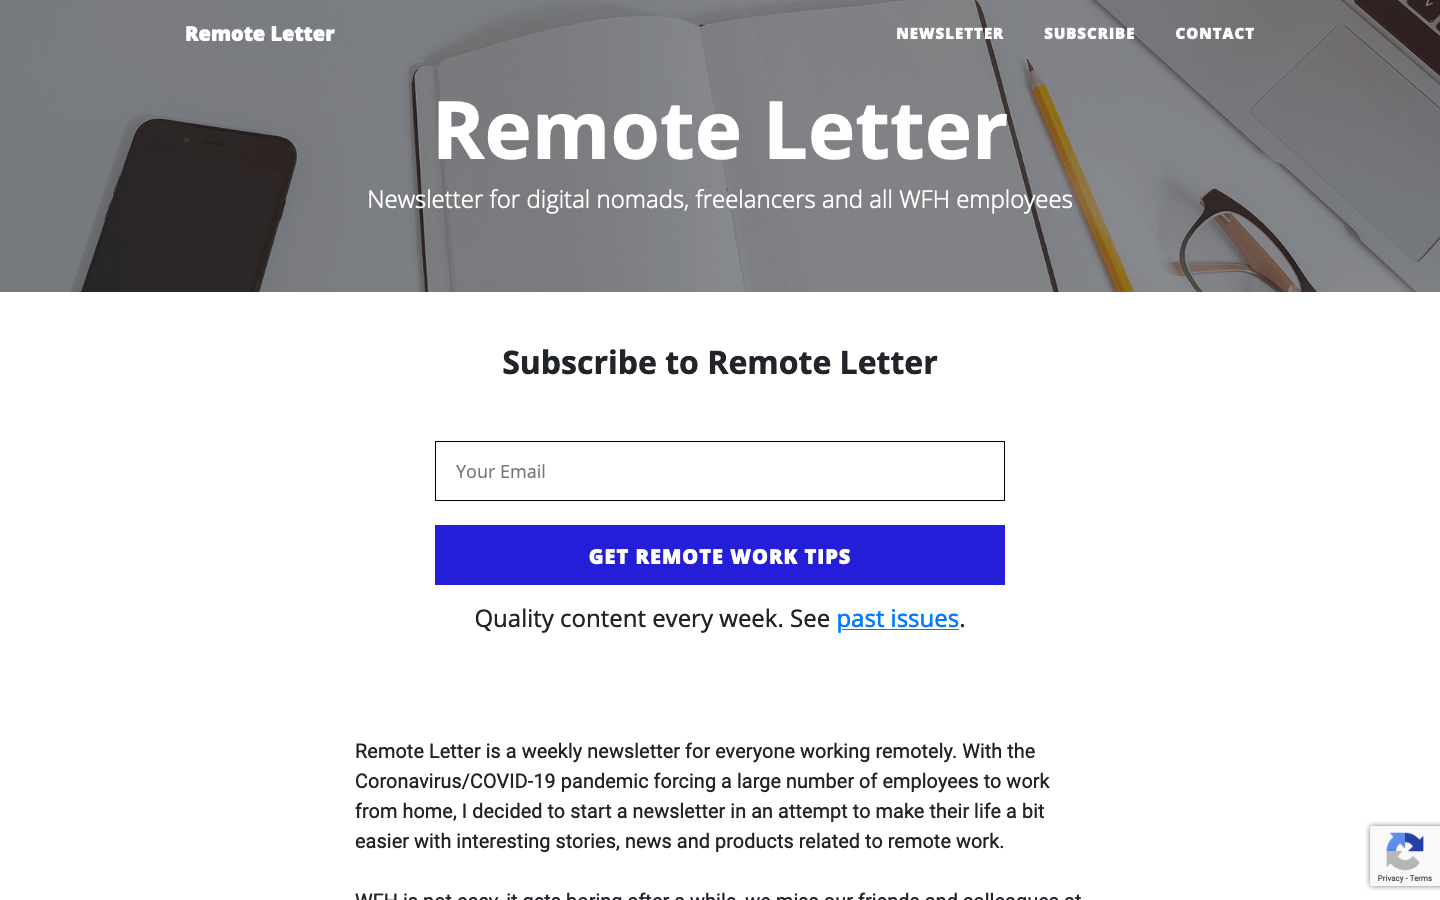 Remote Letter homepage